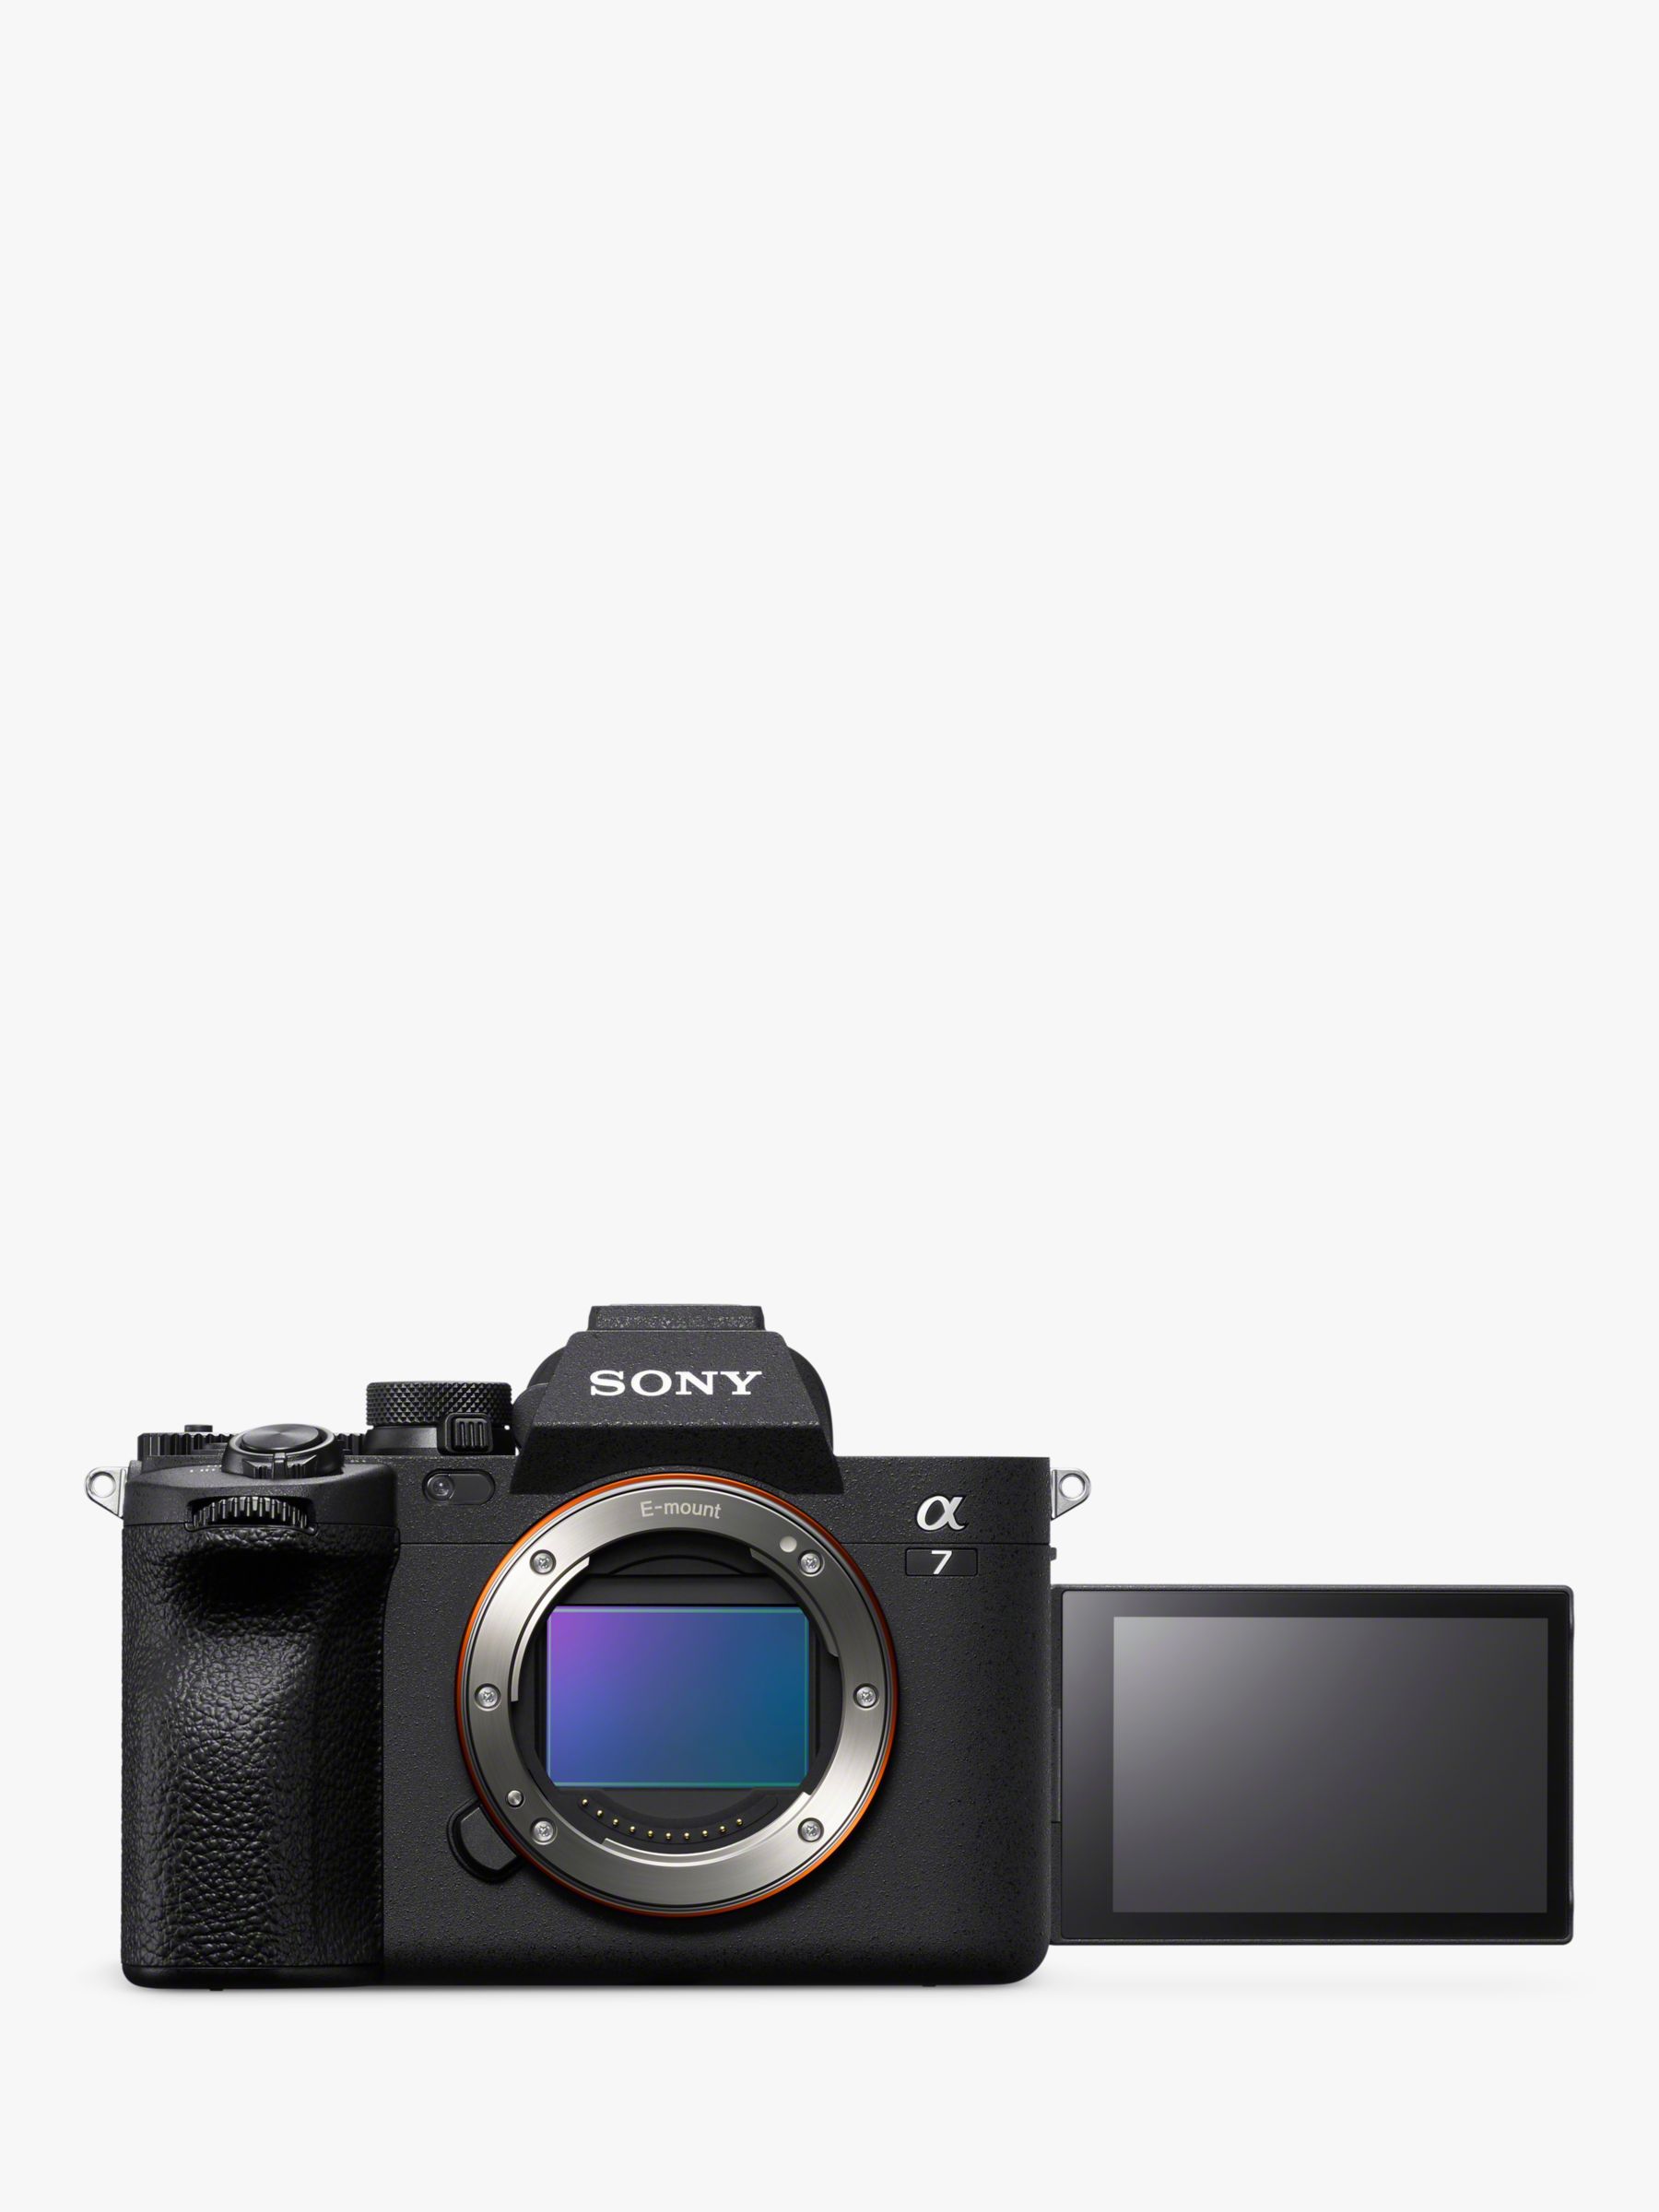 Sony a7 IV ILCE-7M4 - Digital camera - mirrorless - 33.0 MP - Full Frame -  4K / 60 fps - body only - Wi-Fi, Bluetooth 